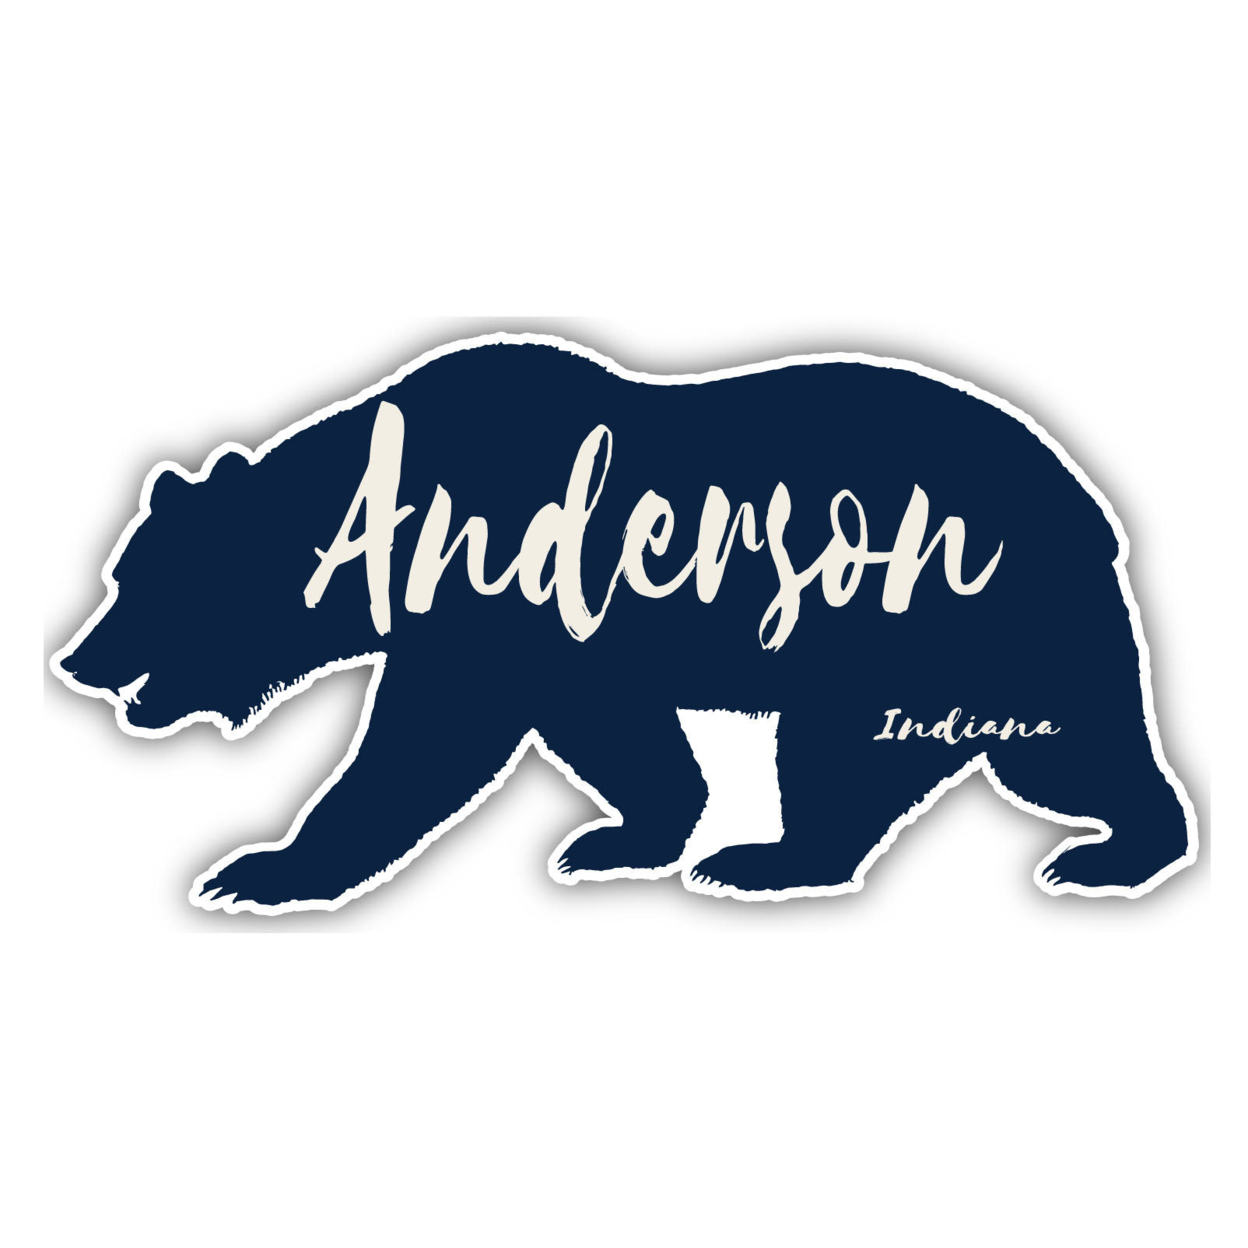 Anderson Indiana Souvenir Decorative Stickers (Choose Theme And Size) - 4-Pack, 8-Inch, Bear